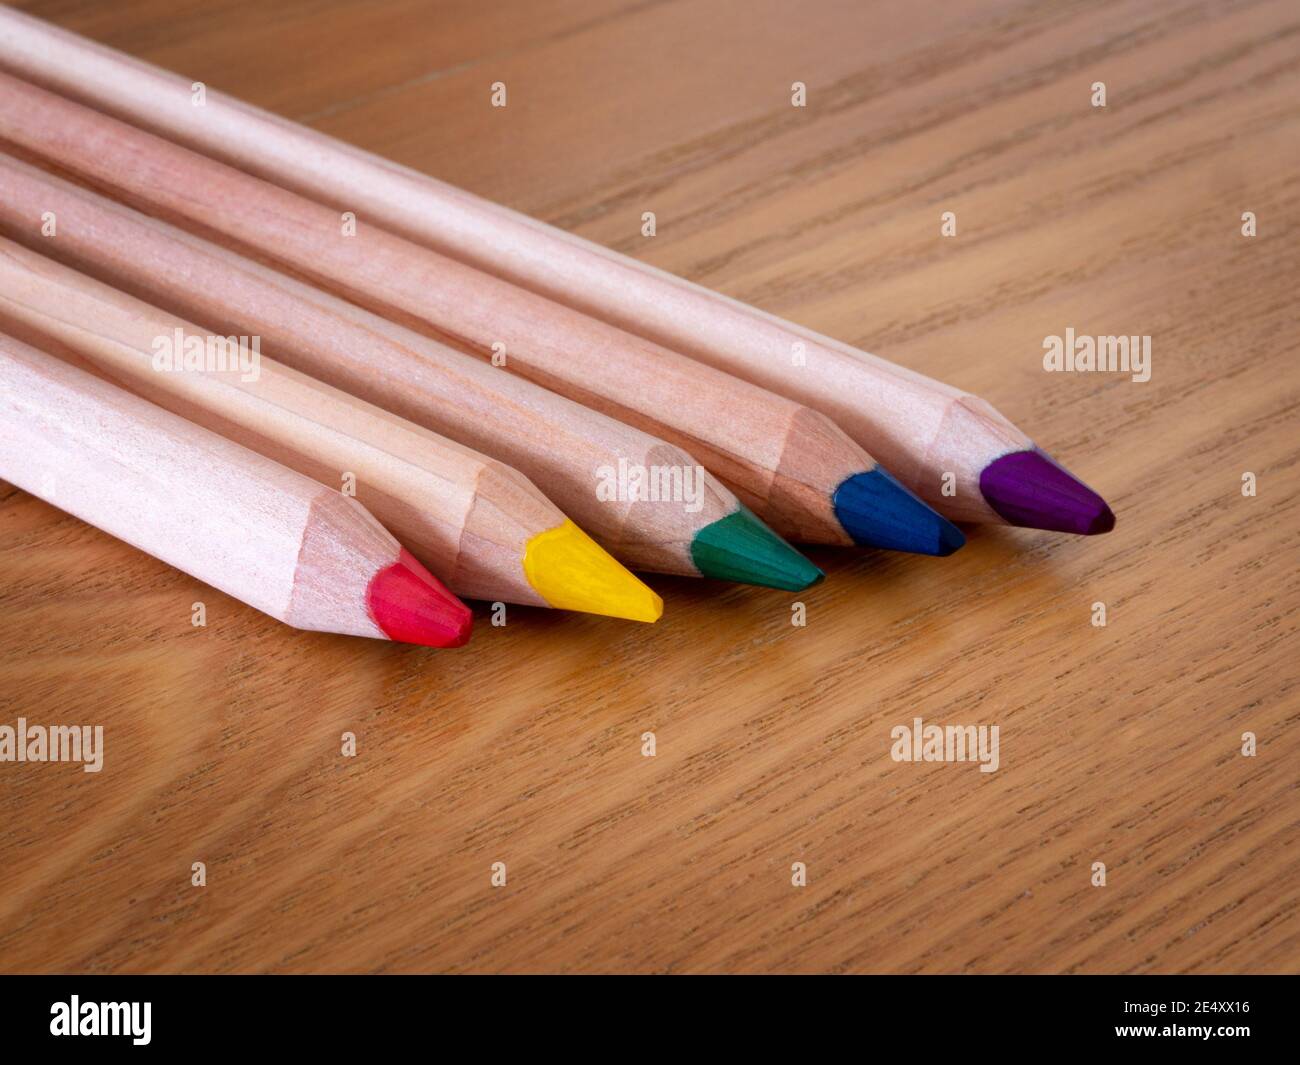 Five different colored pencils lines up on a wooden table Stock Photo